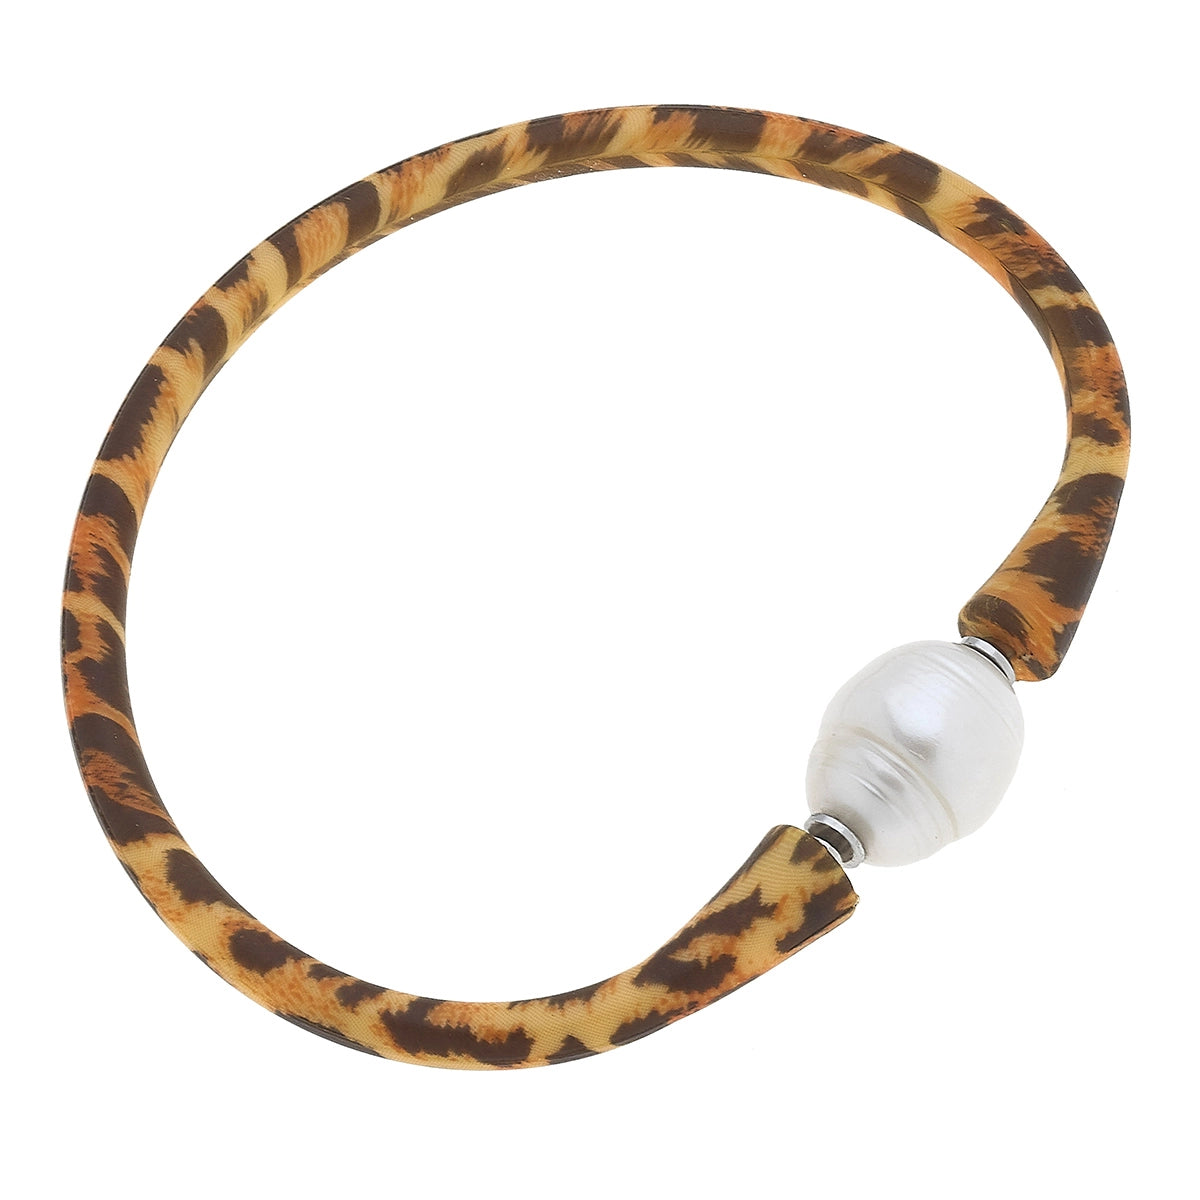 Leopard print silicone bracelet with a small pearl bead